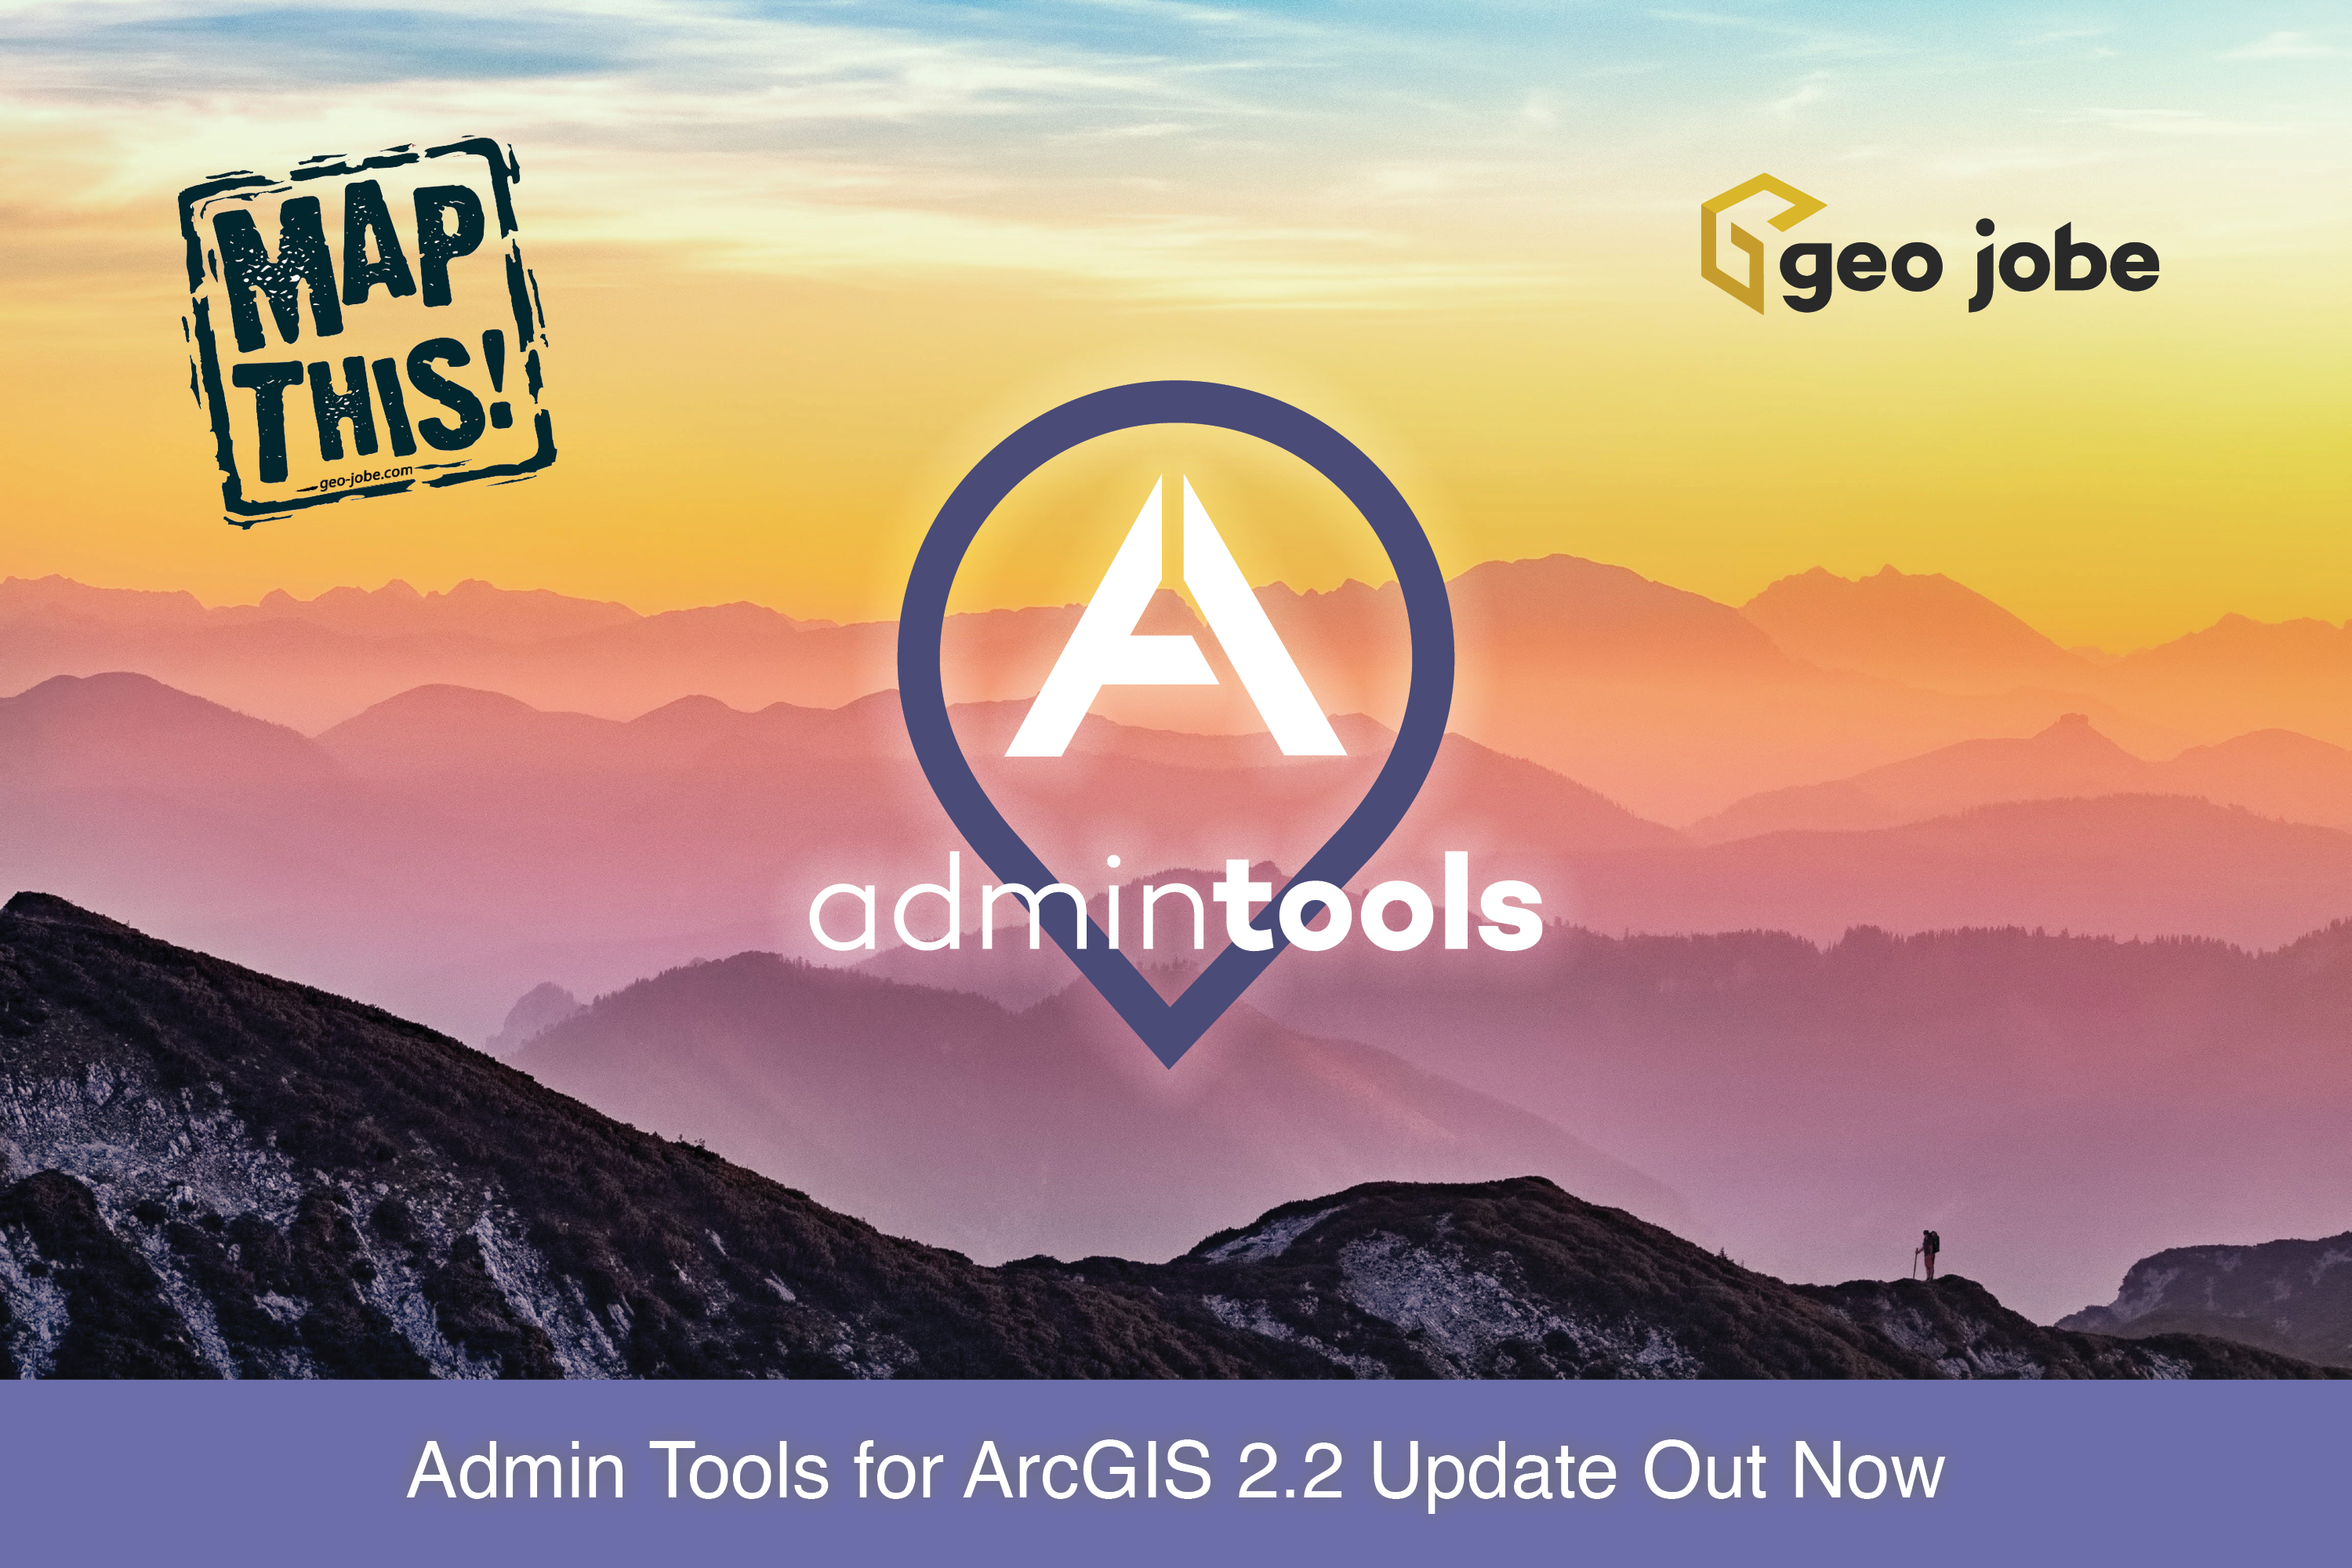 Admin Tools for ArcGIS 2.2 Out Now